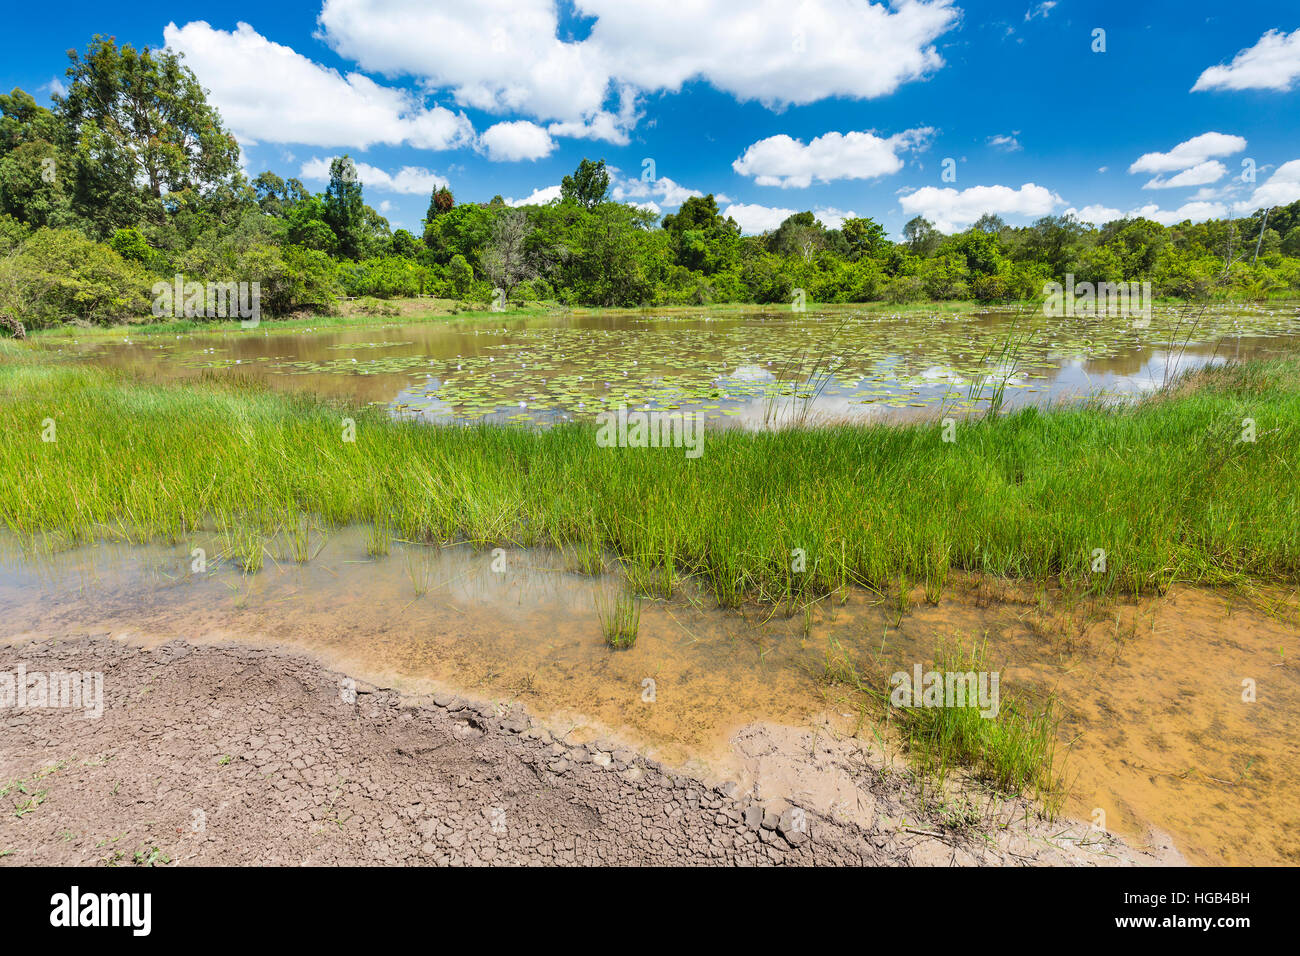 The beautiful Lily Lake in Karura Forest with the shore in the foreground, Nairobi, Kenya with blue sky. Stock Photo